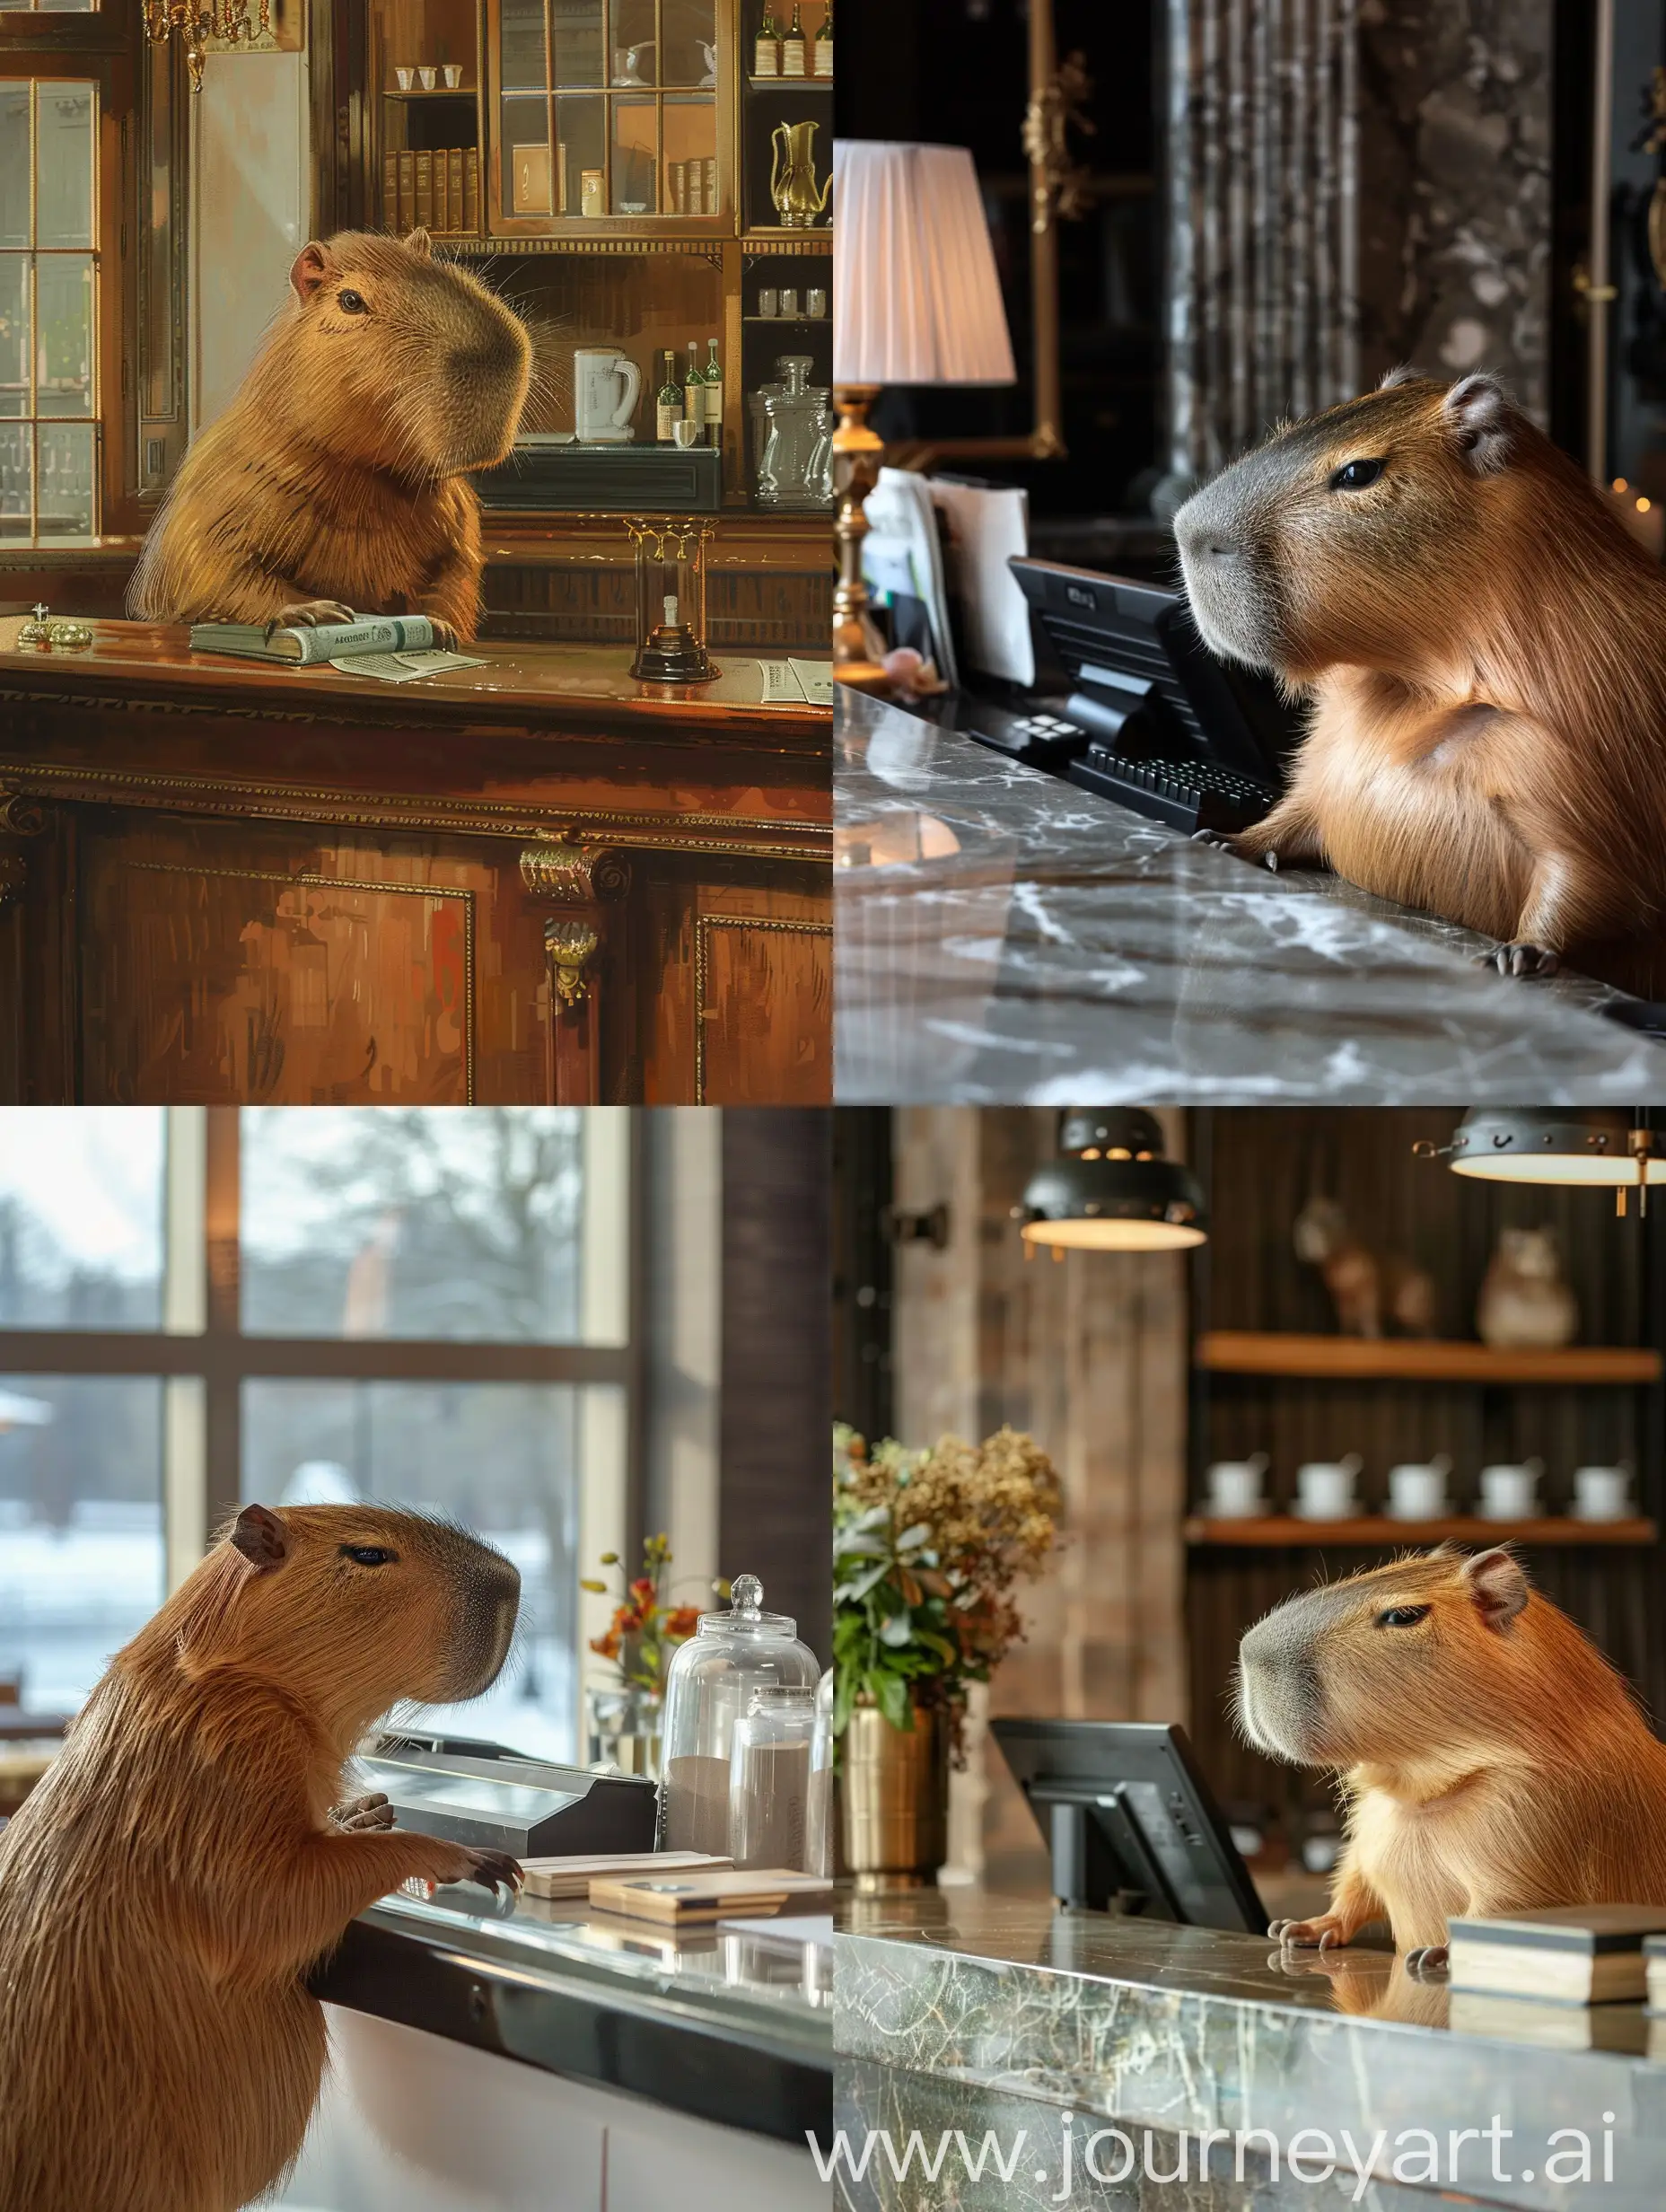 a beautiful capybara at the reception desk, she is working as administrator, five stars hotel, russia, scandic styles hotel